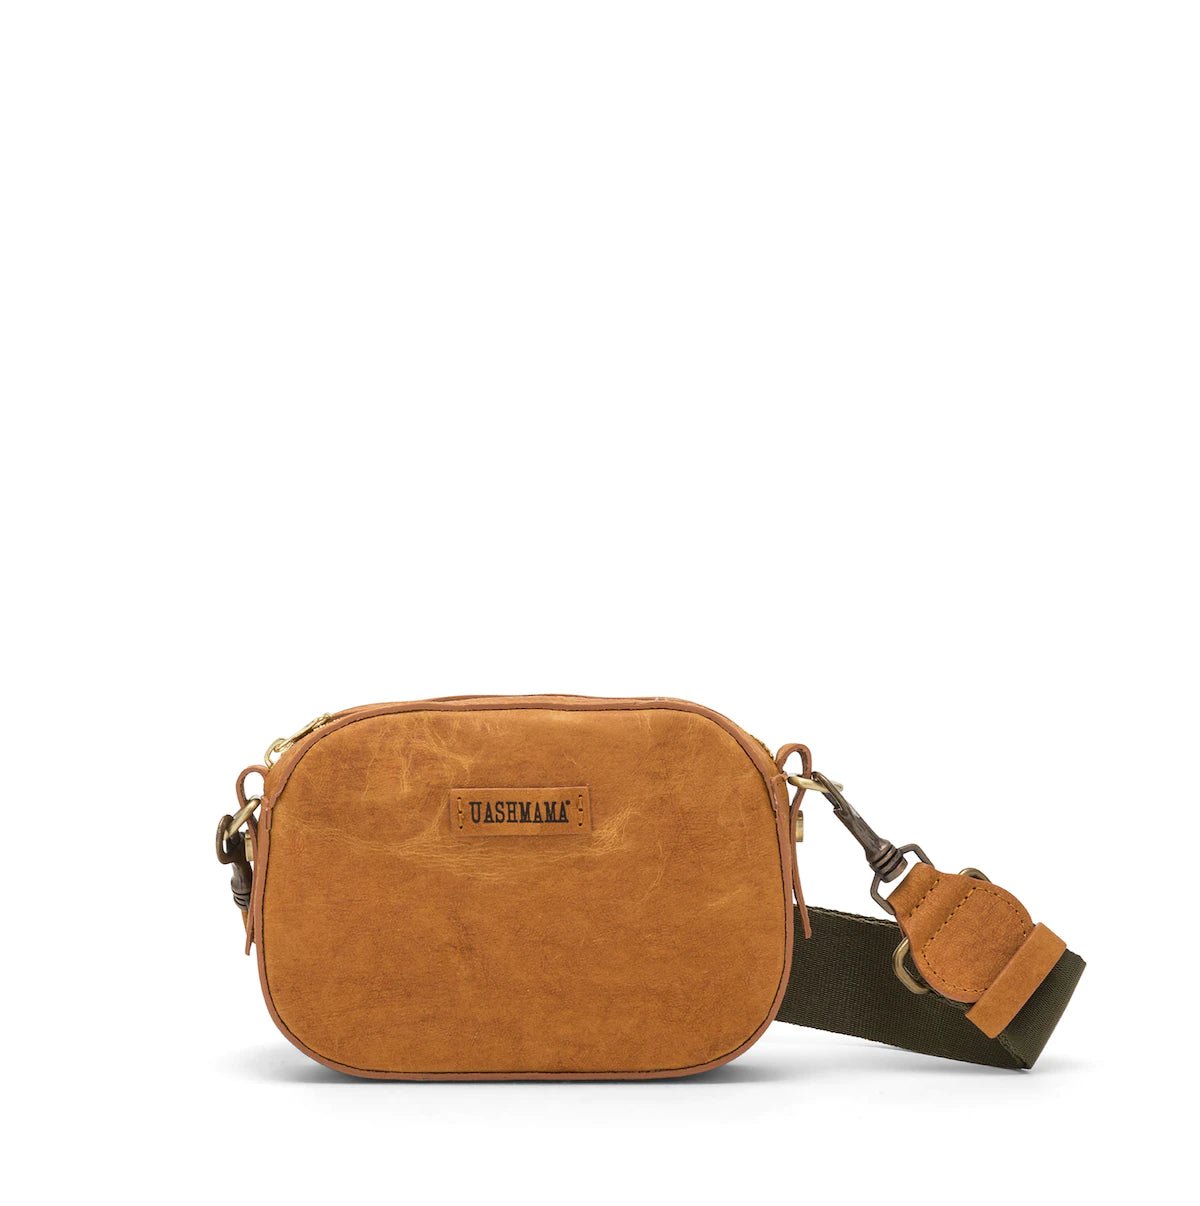 A small washable paper cross-body bag is shown with a front tab bearing the UASHMAMA logo in a small font, embossed in a darker colour. The bag is shown in tan, with a khaki cotton strap with antique brass hardware.